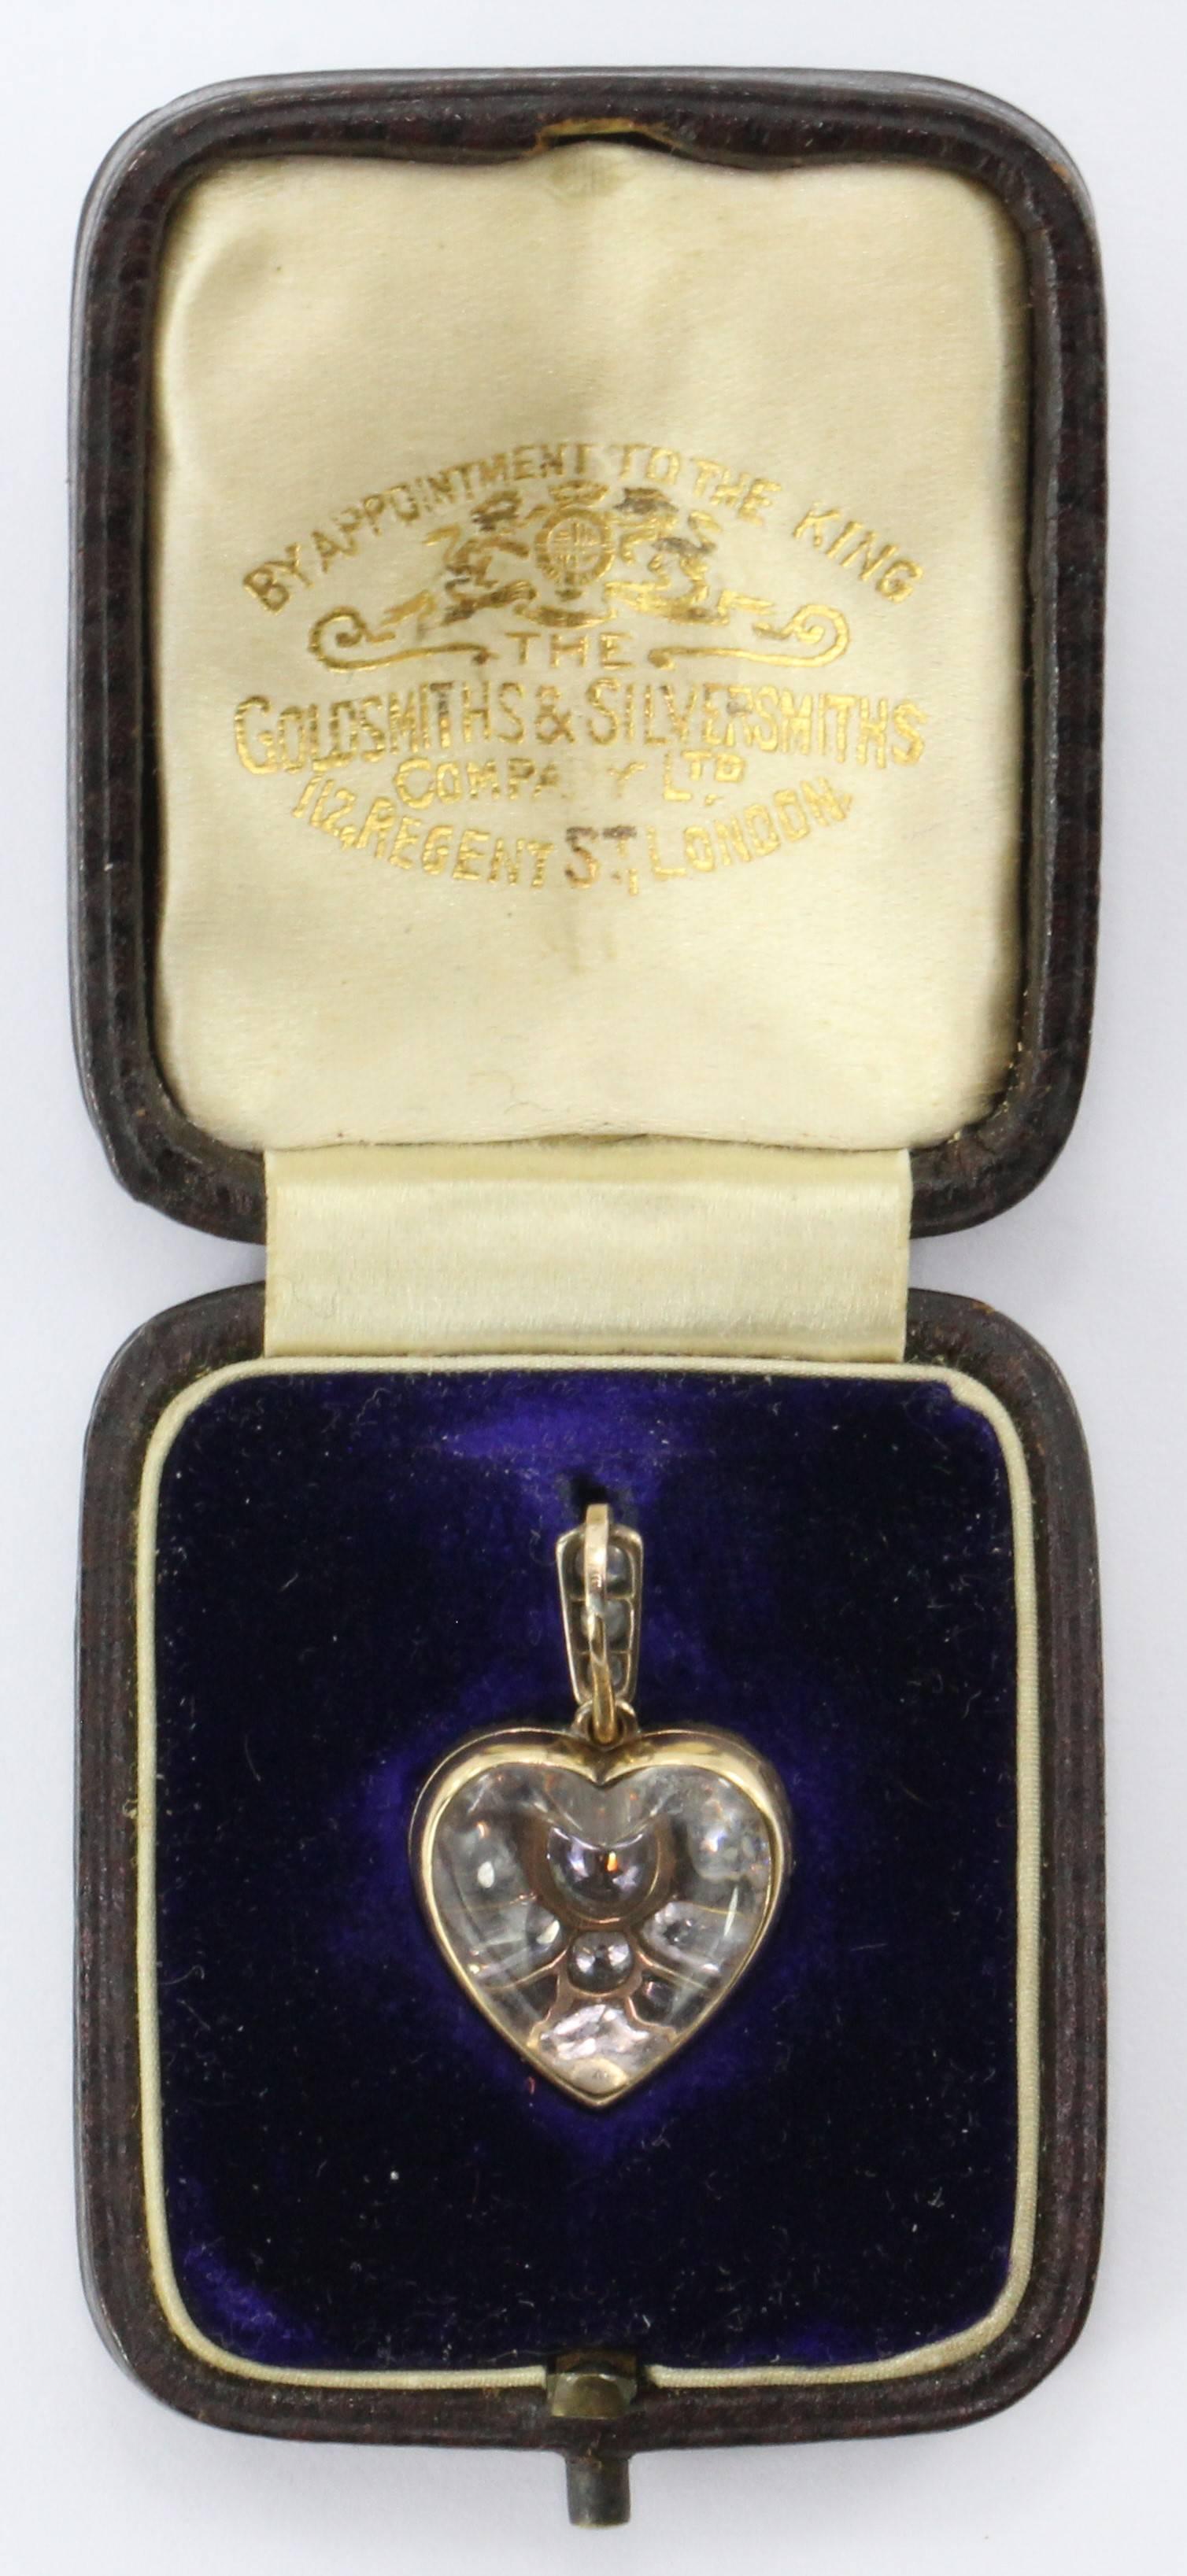 Antique Edwardian 15ct Gold Diamond Rock Crystal Heart Locket Pendant 1.25 CTW. The piece is in excellent estate condition and ready to wear. It comes in its original fitted box from the Goldsmiths & Silversmiths Company Ltd of London England. The